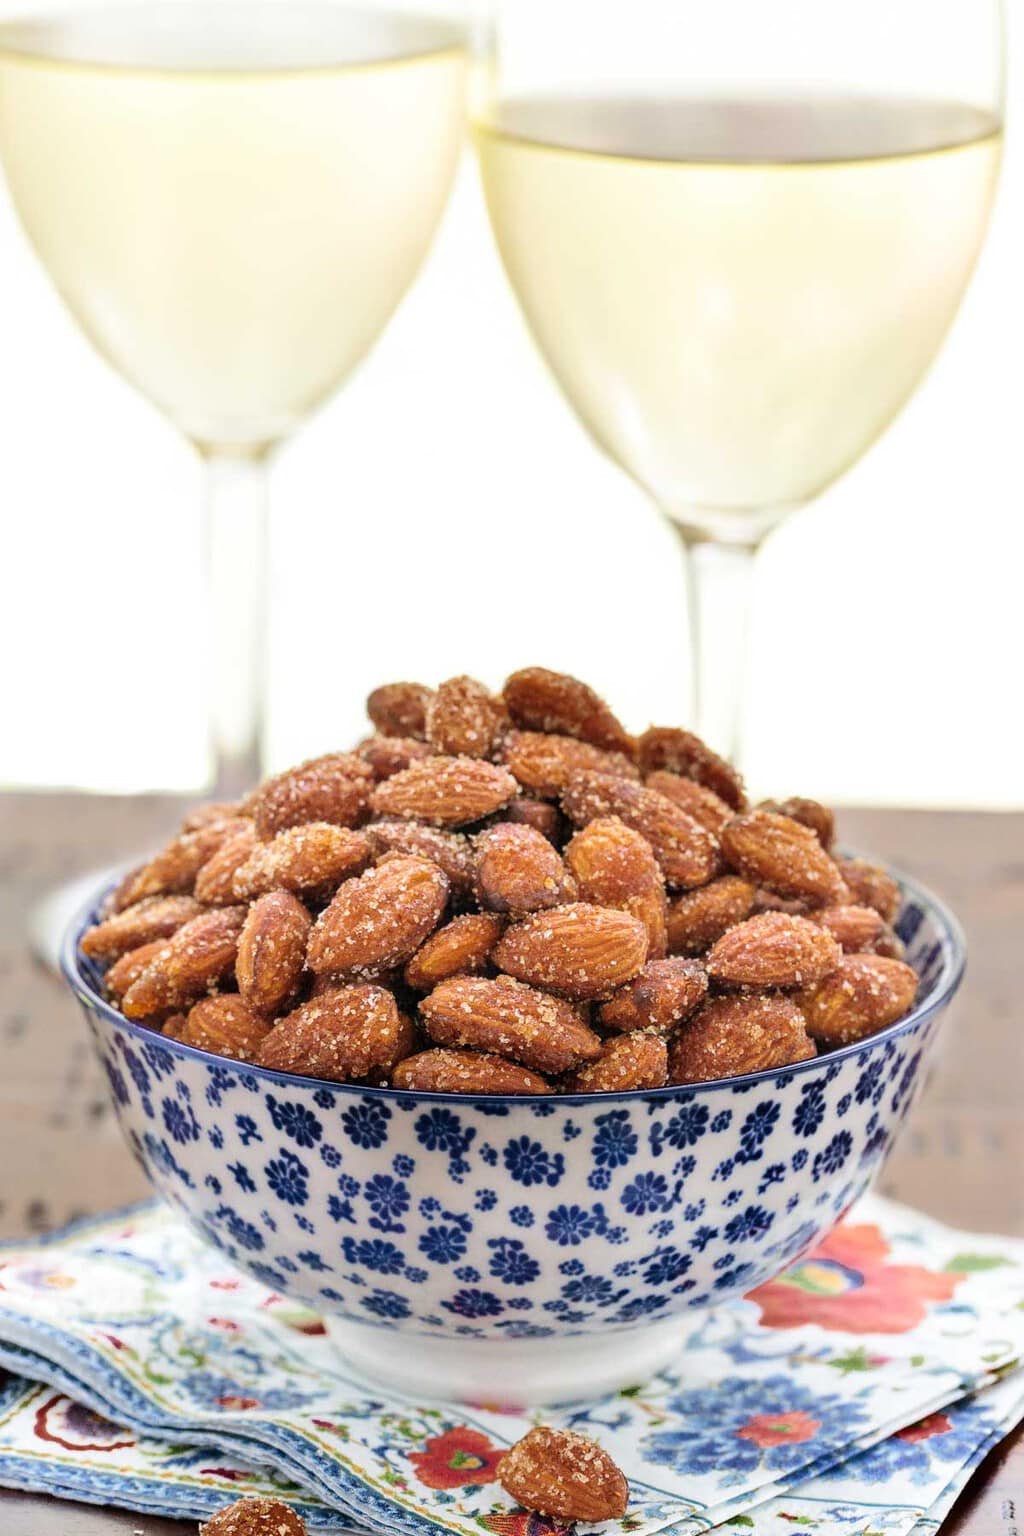 Vertical photo of Sweet and Spicy Almonds in a blue and white patterned bowl in front of two glasses of white wine.